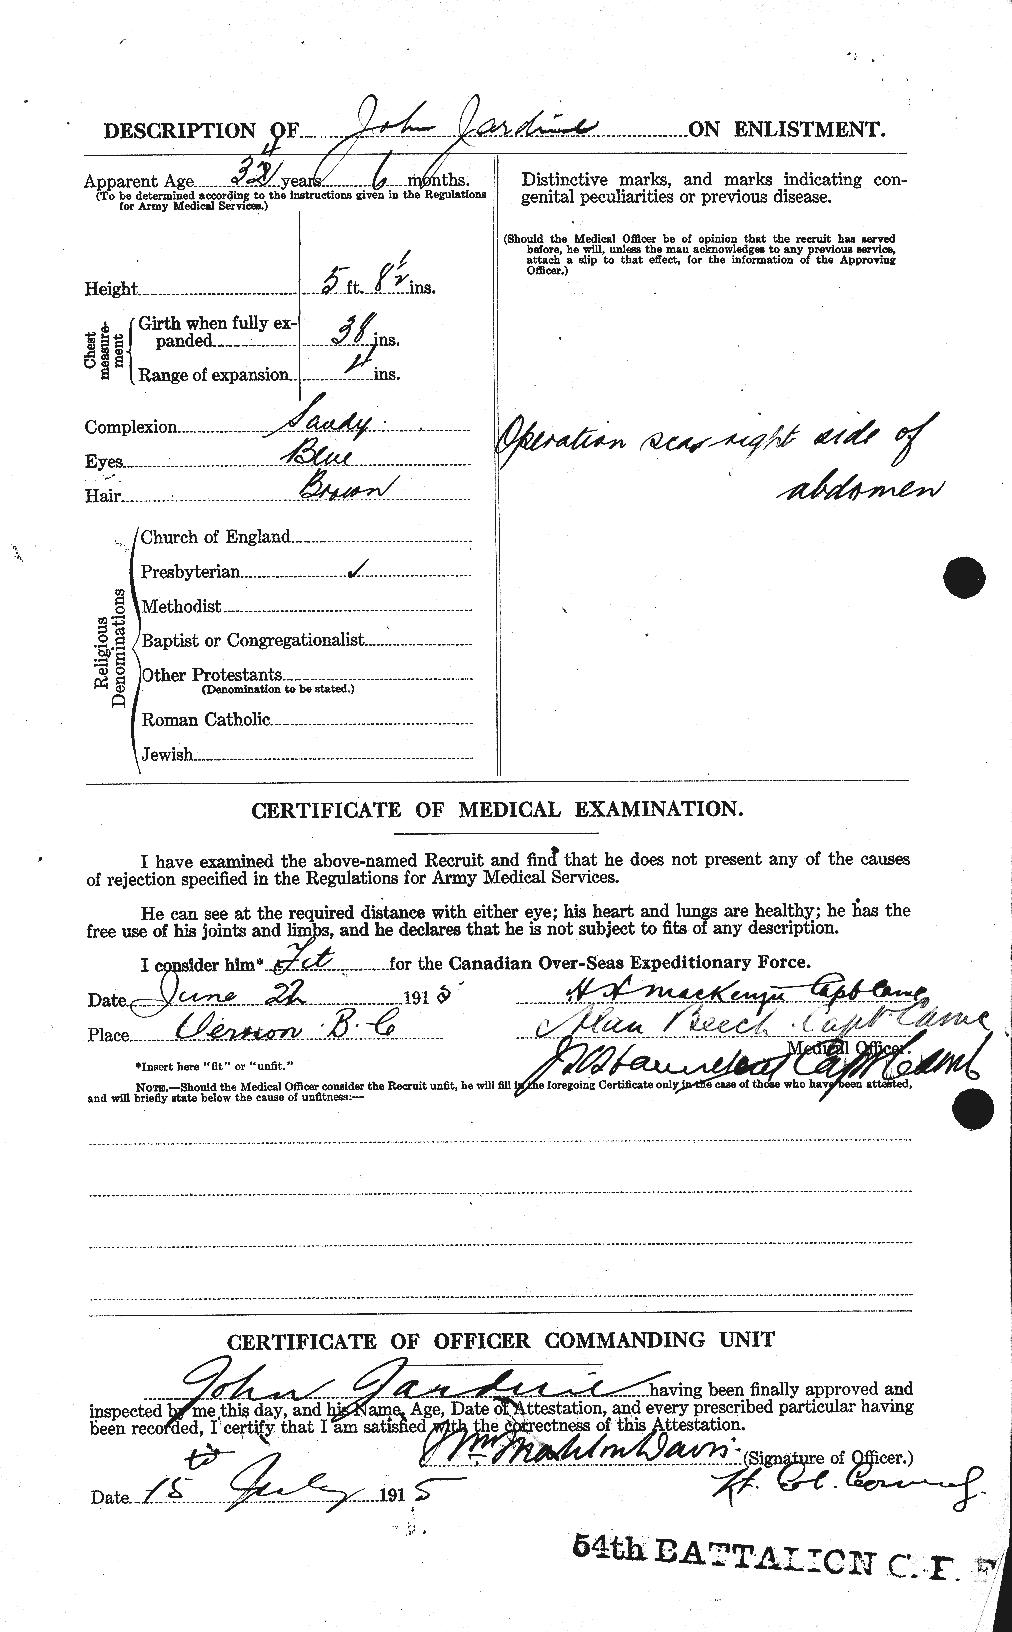 Personnel Records of the First World War - CEF 416403b